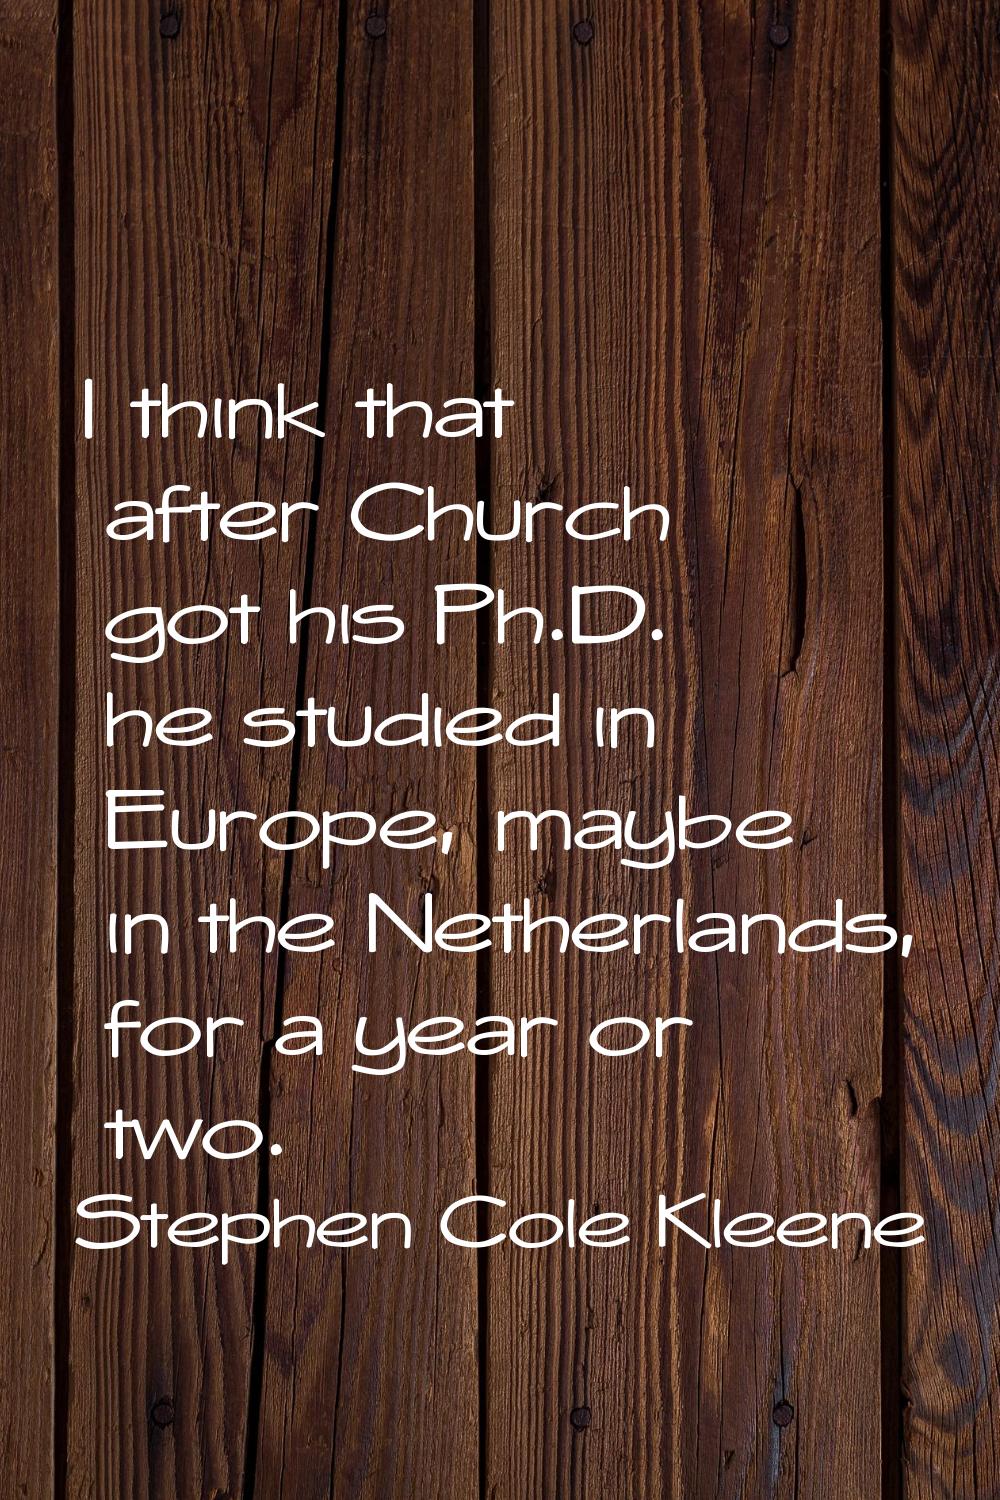 I think that after Church got his Ph.D. he studied in Europe, maybe in the Netherlands, for a year 